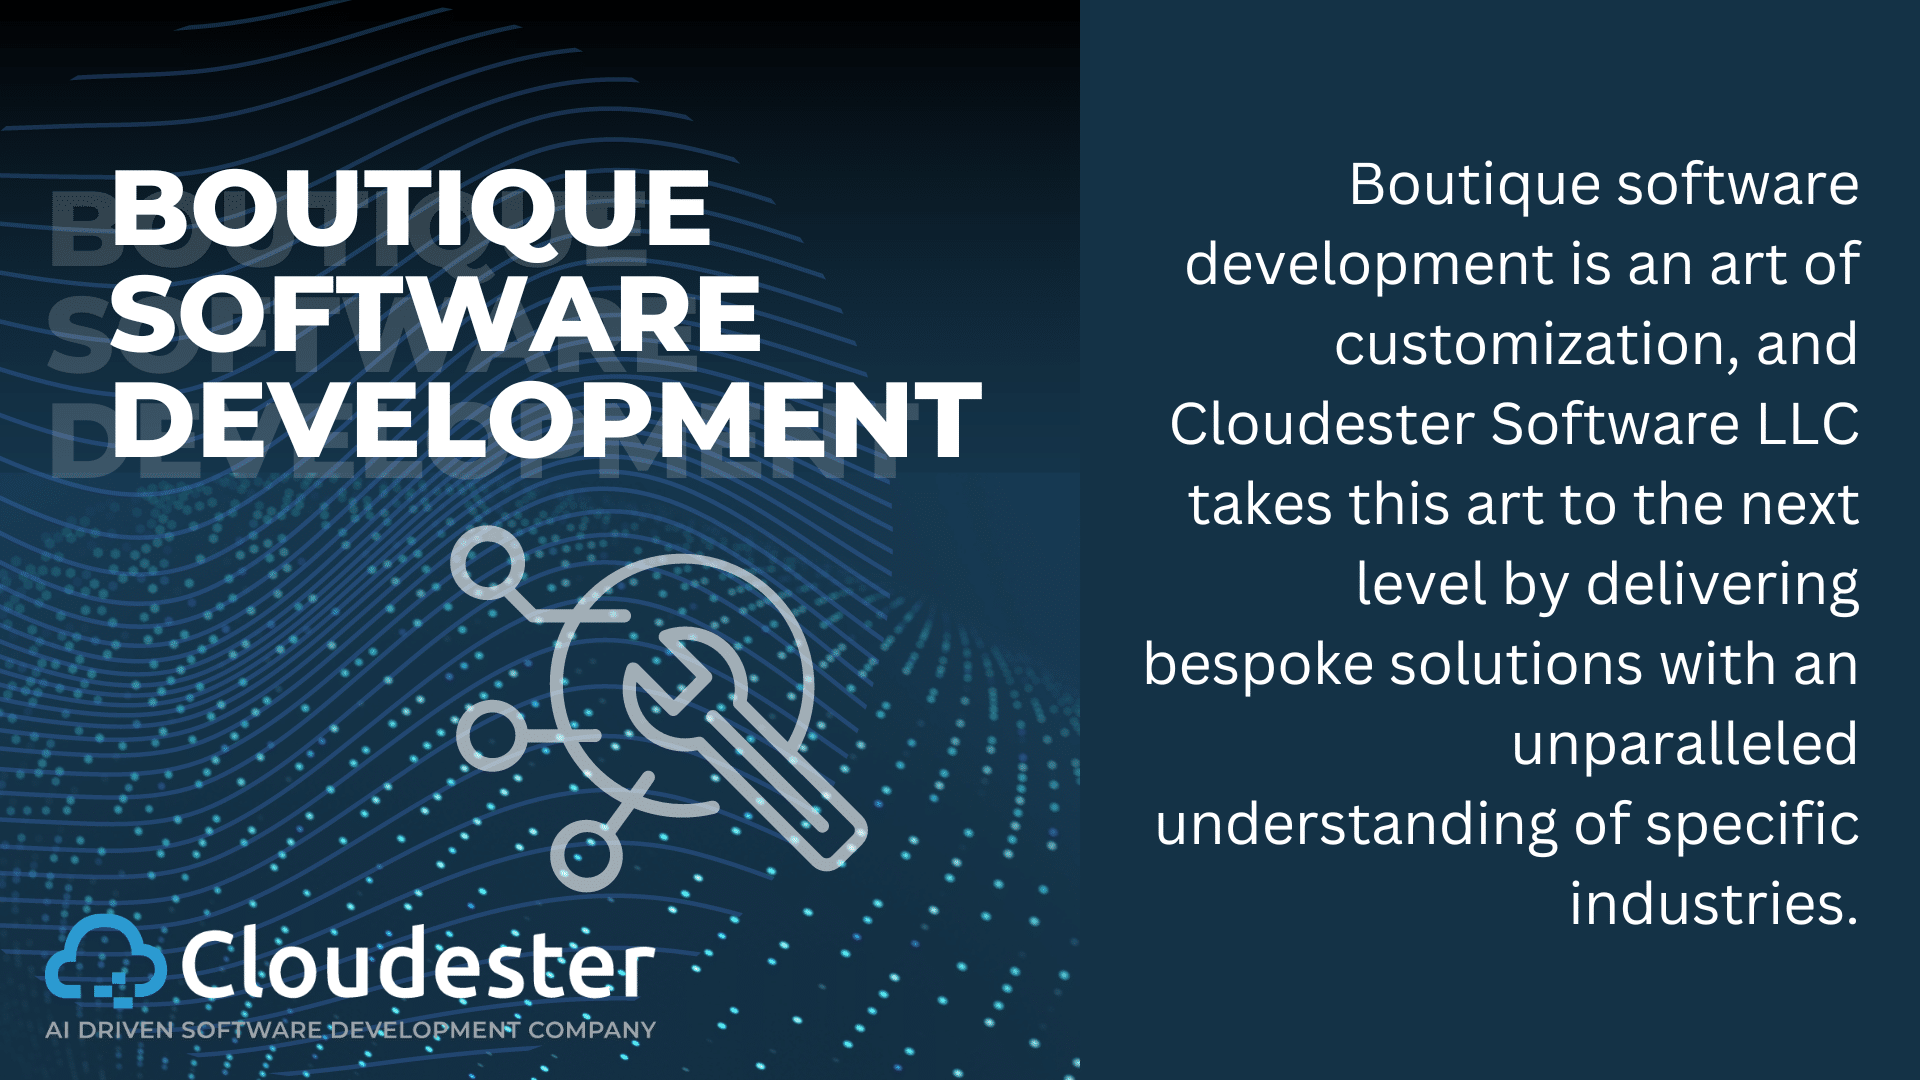 How Does Cloudester Software Tailor Boutique Software Solutions to Meet Client Needs?